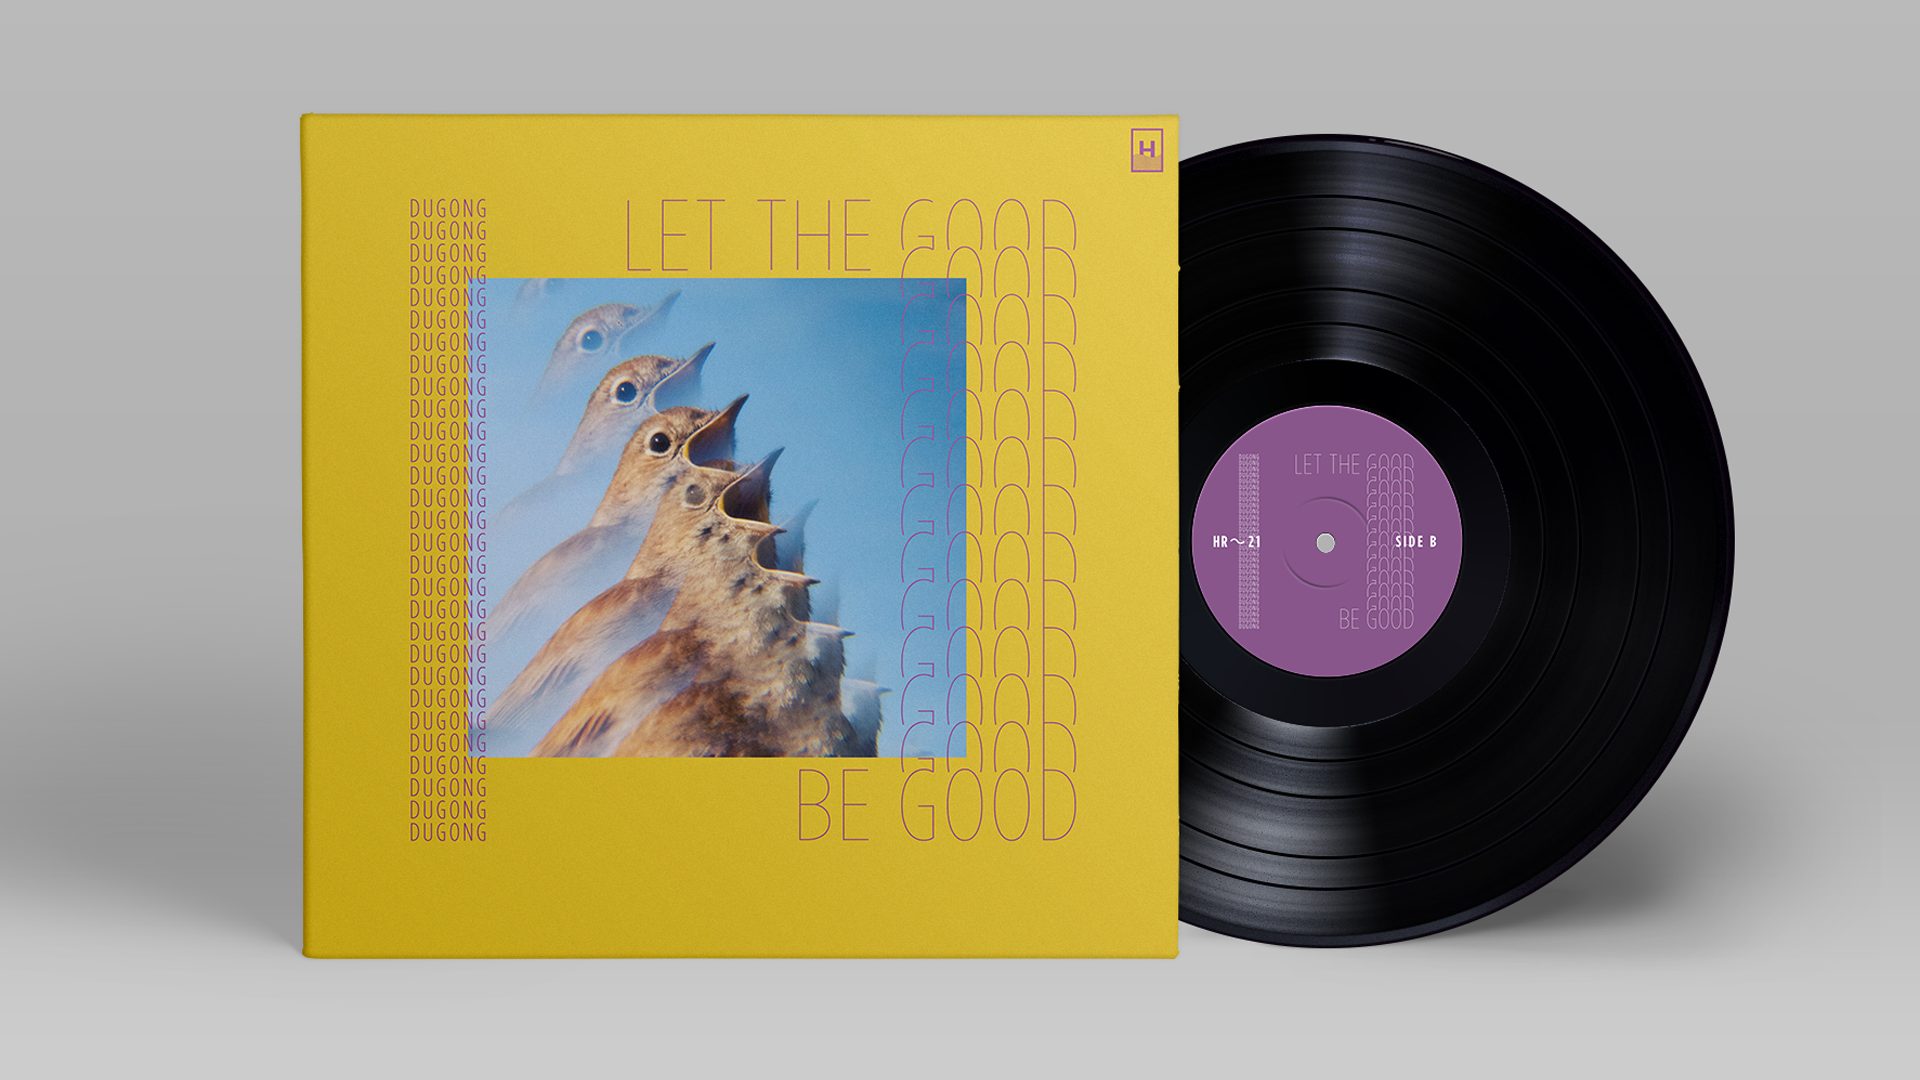 Permalink to: Pre-order the new album LET THE GOOD BE GOOD